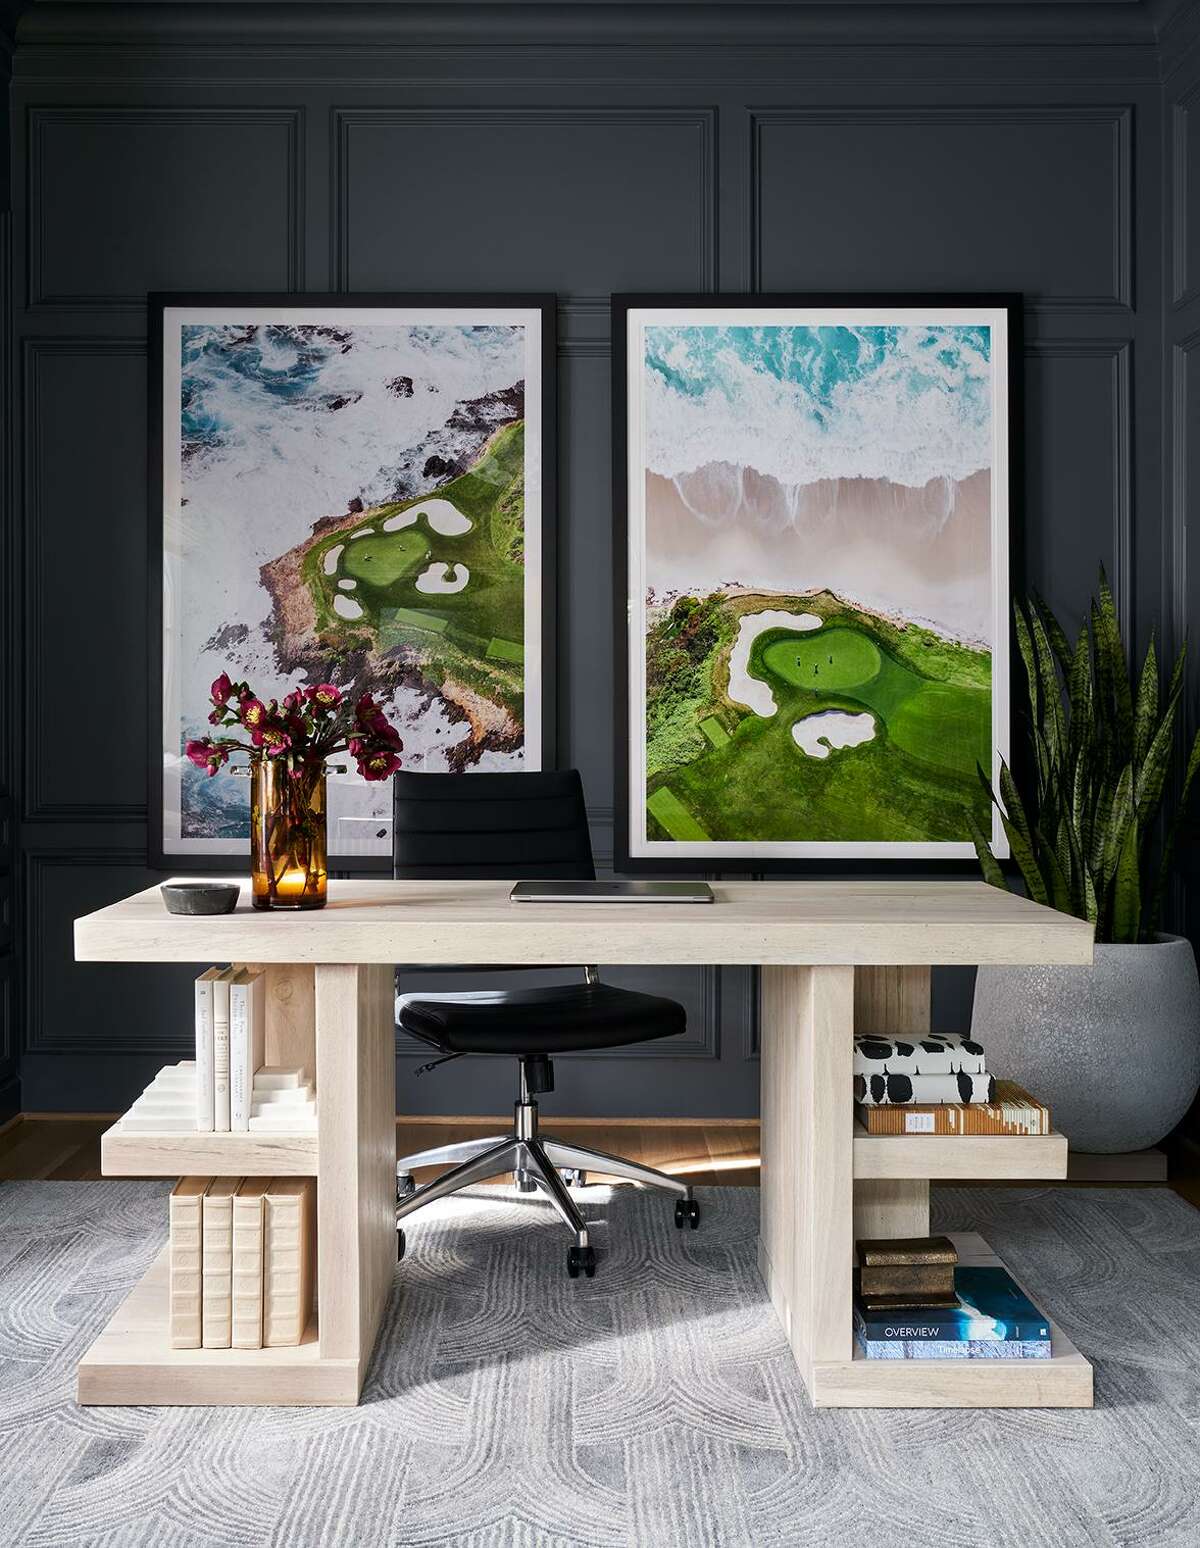 Photography in the Nguyens’ home office shows one of Mike’s favorite places to play golf, Pebble Beach.